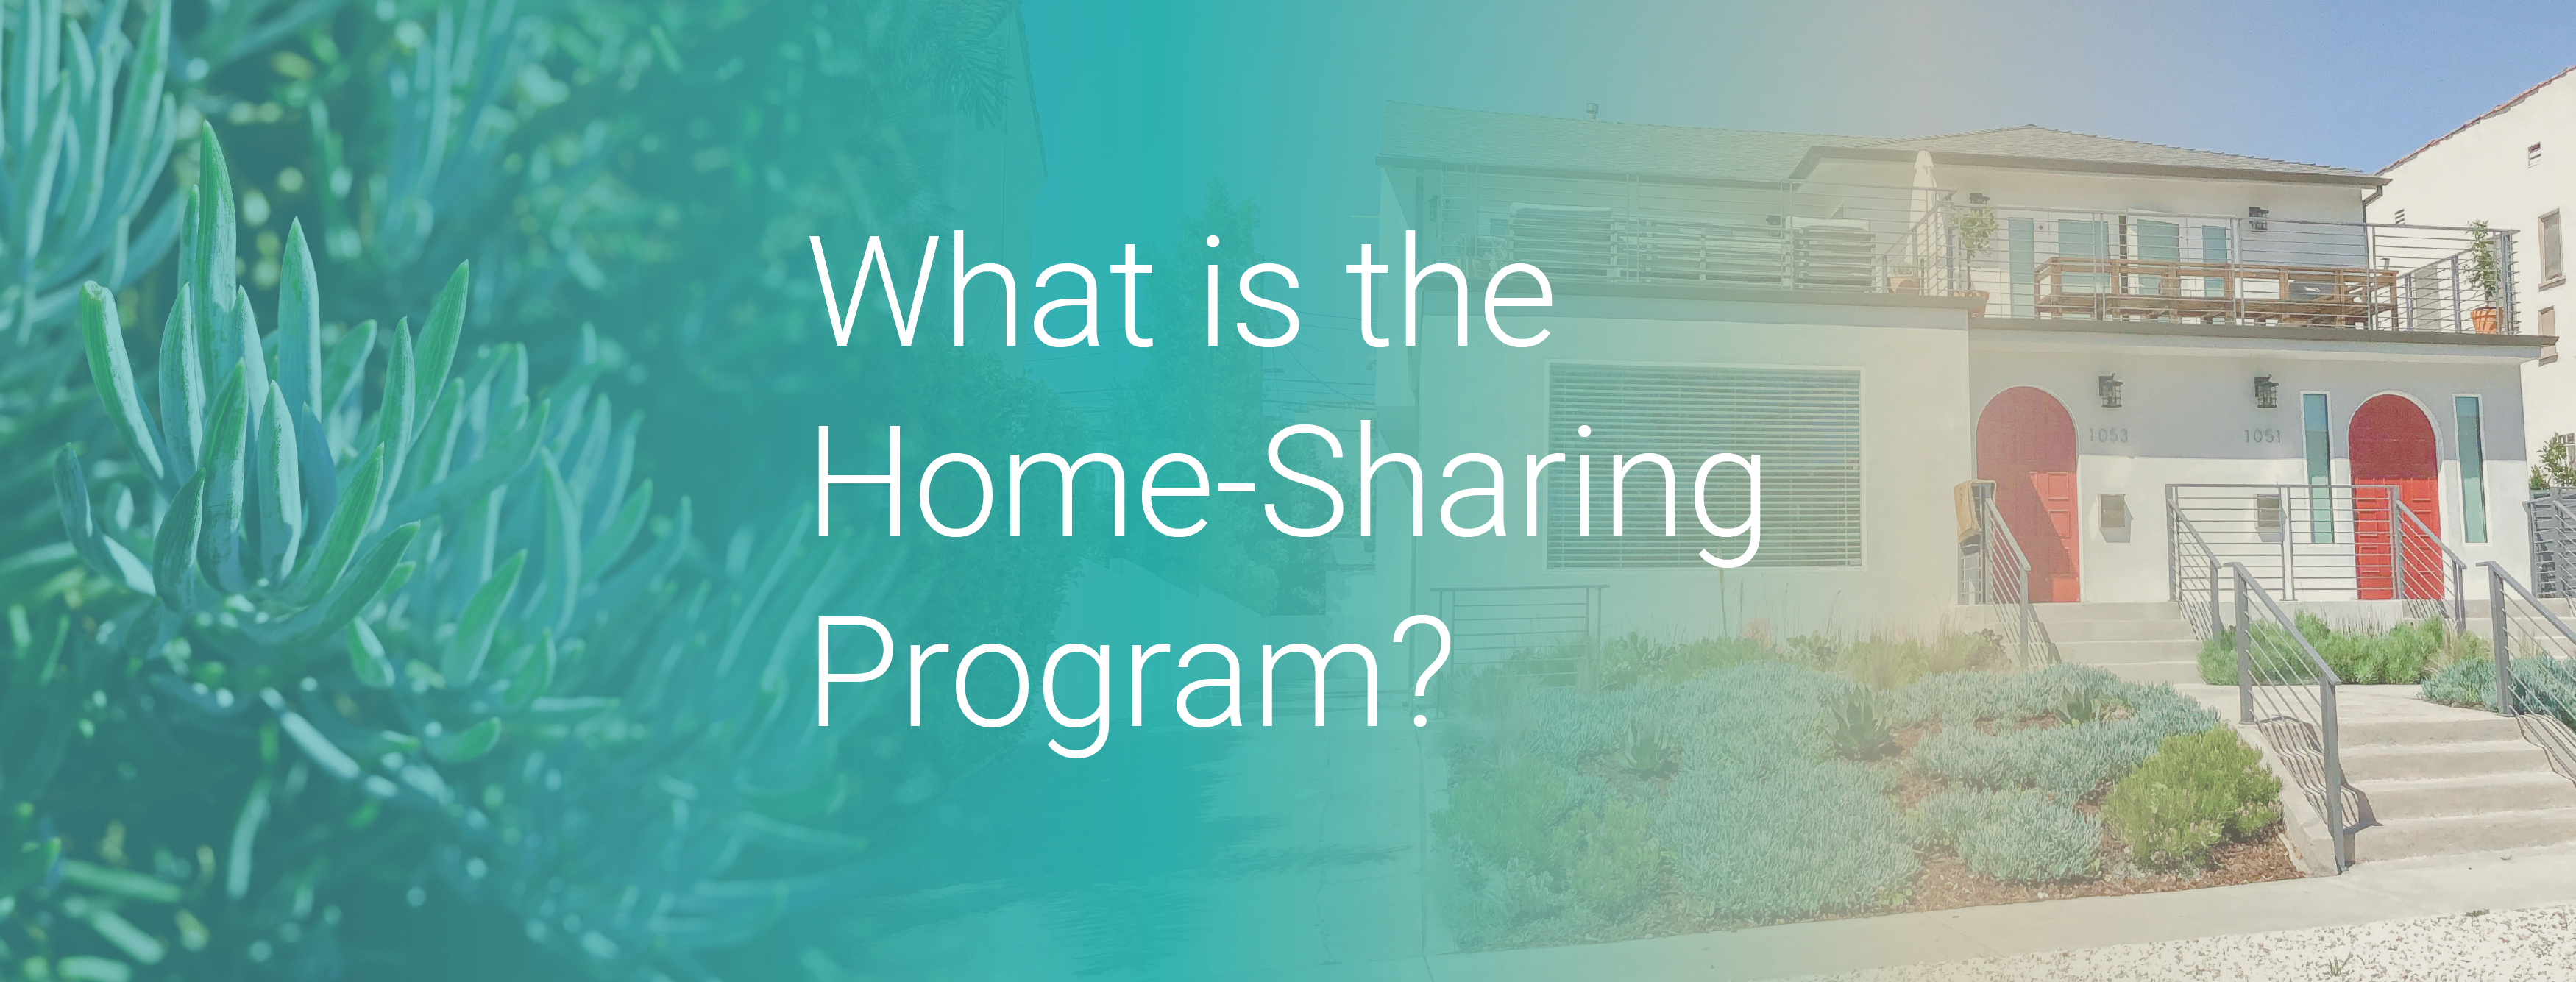 What is the Home-Sharing Program?